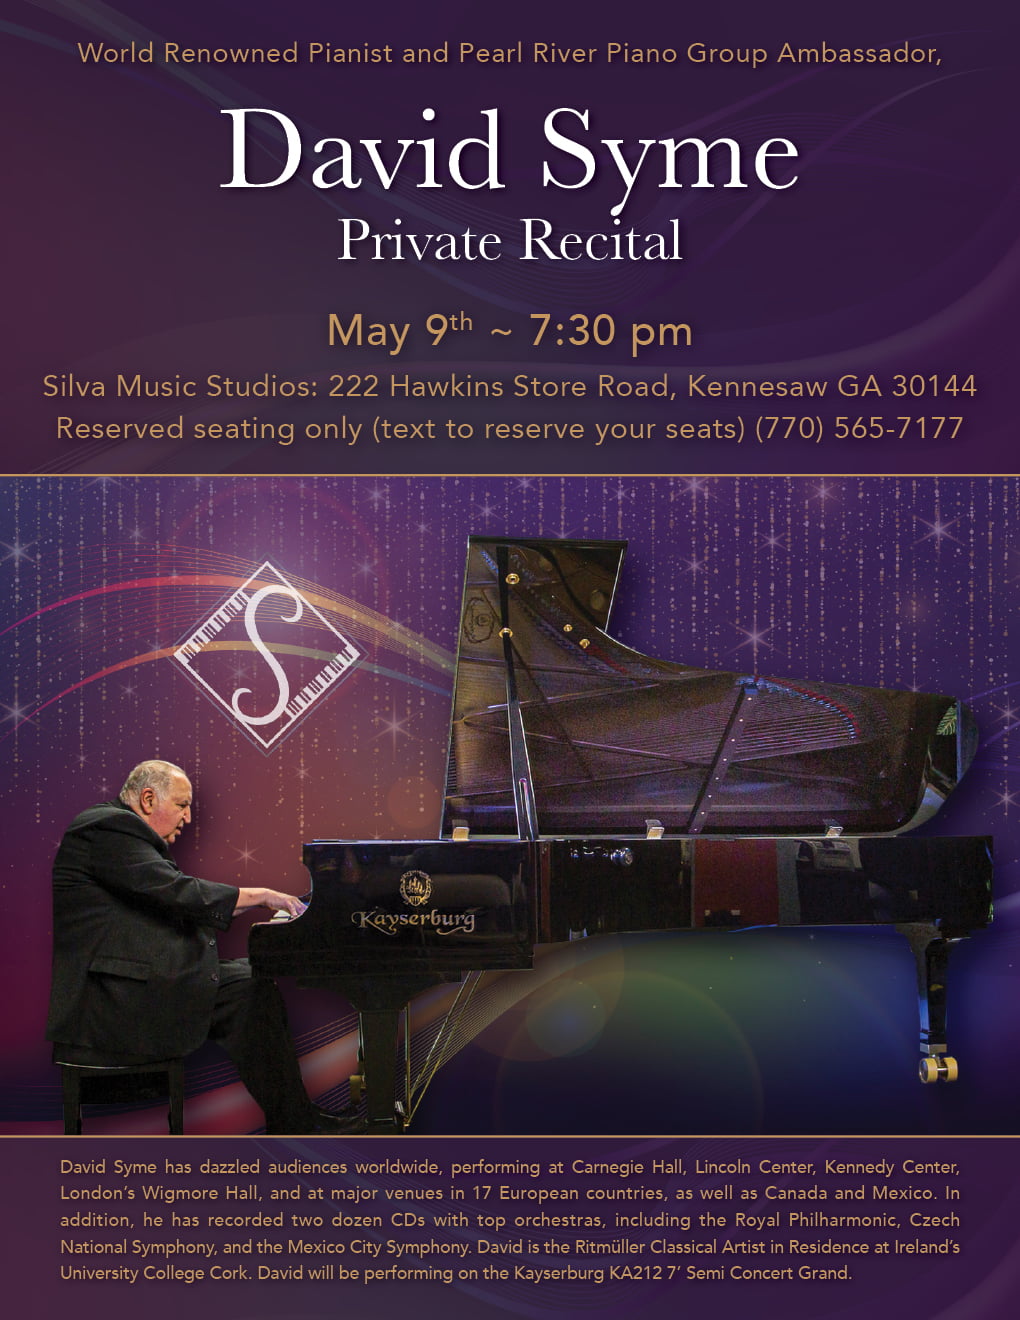 David Syme at piano, concert announcement for this tuesday